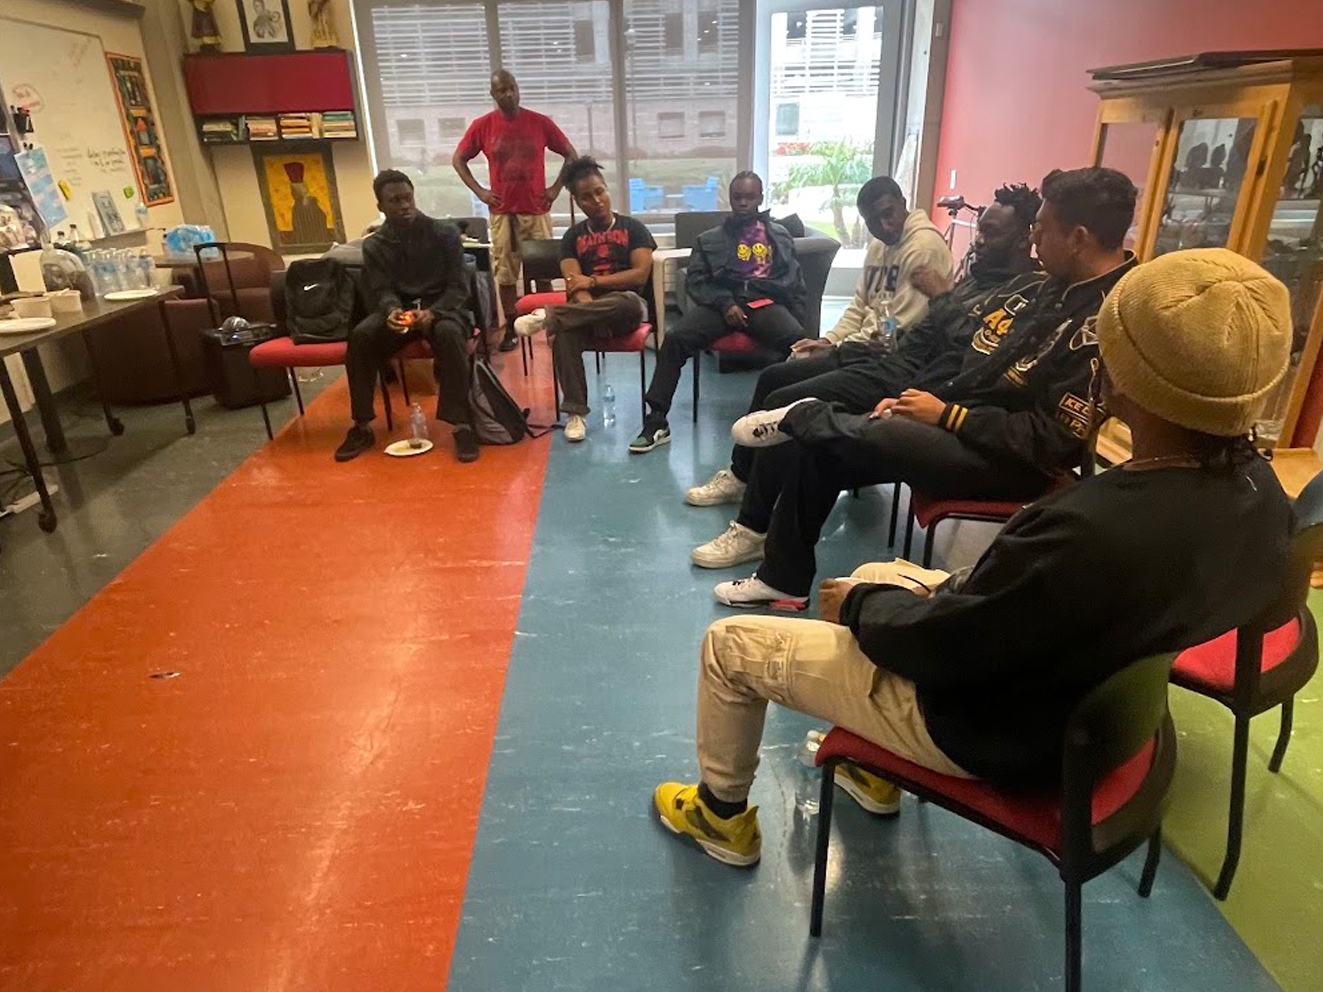 A group of student attendees in conversation during OBSD's event Black Men's Barbershop Talk Series at the AdCRC.